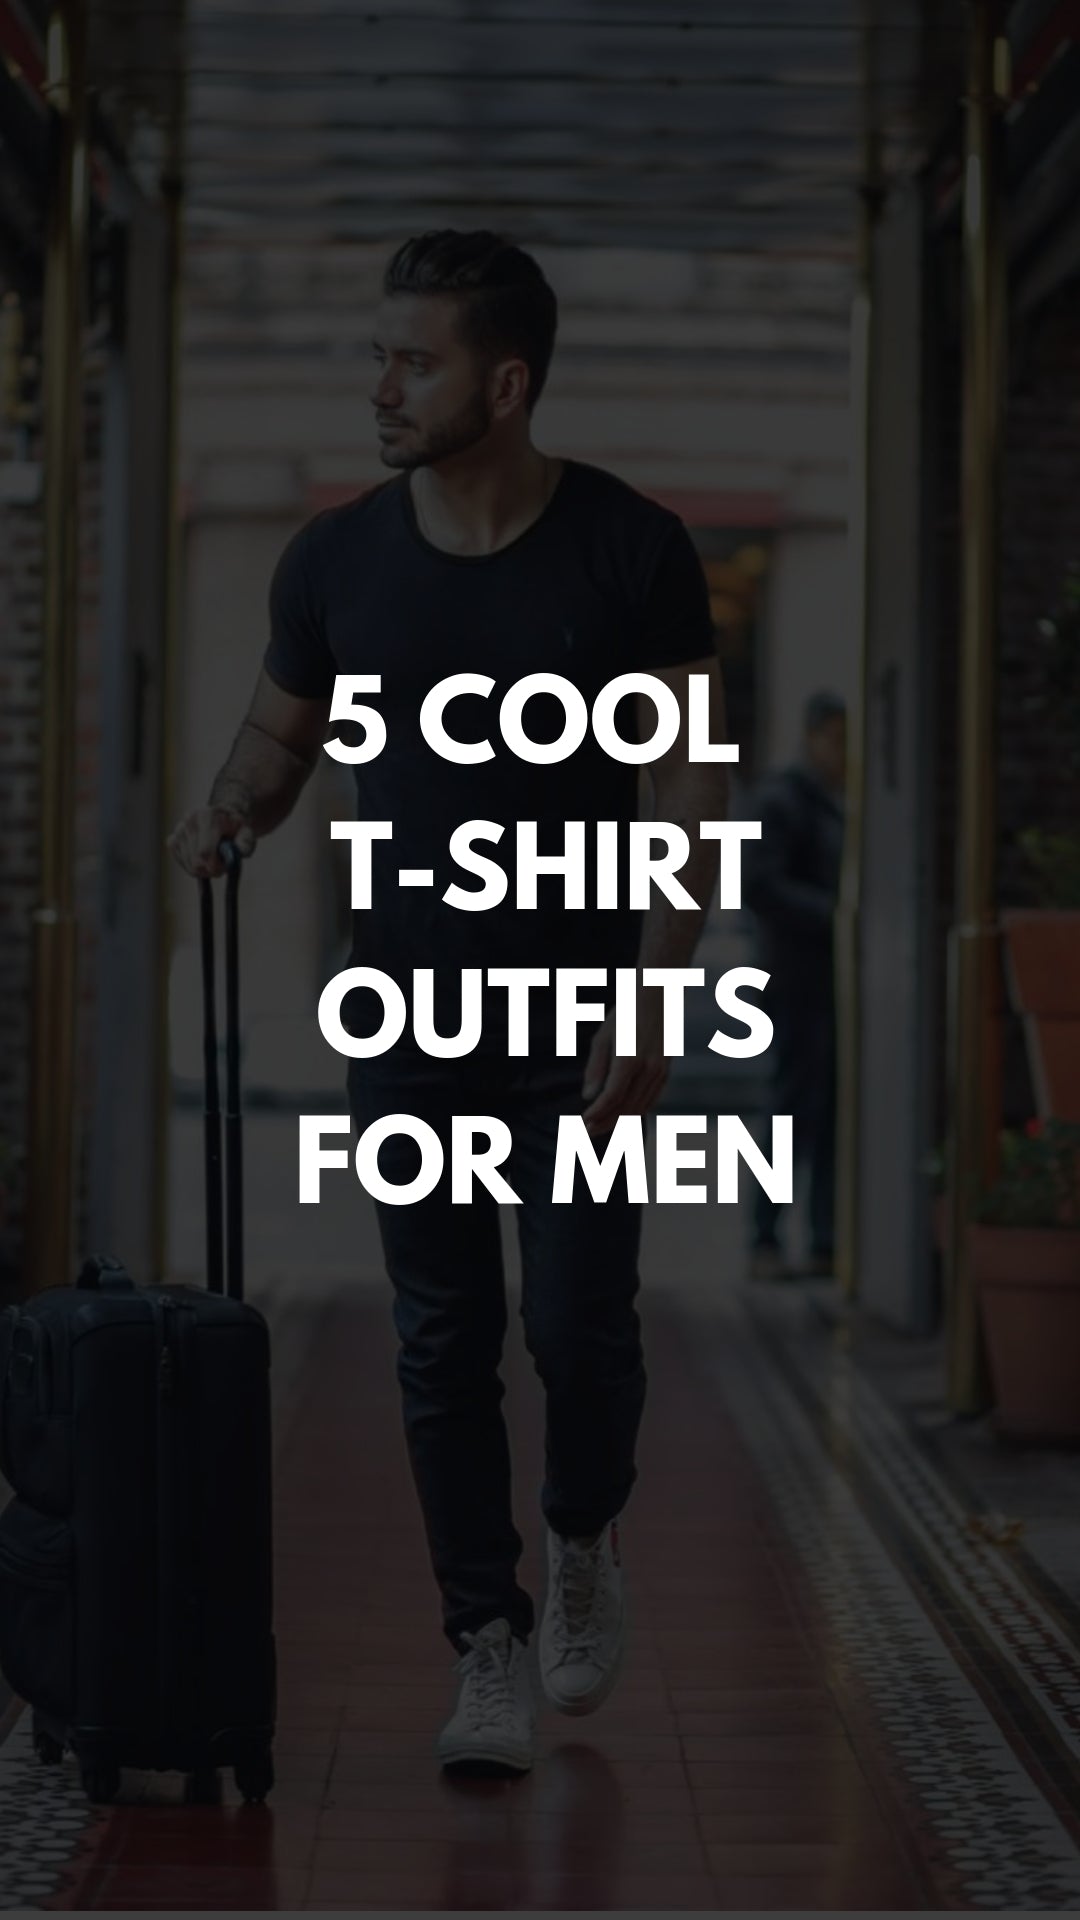 5 Cool T-shirt Outfits For Men #tshirt #outfits #mensfashion #streetstyle